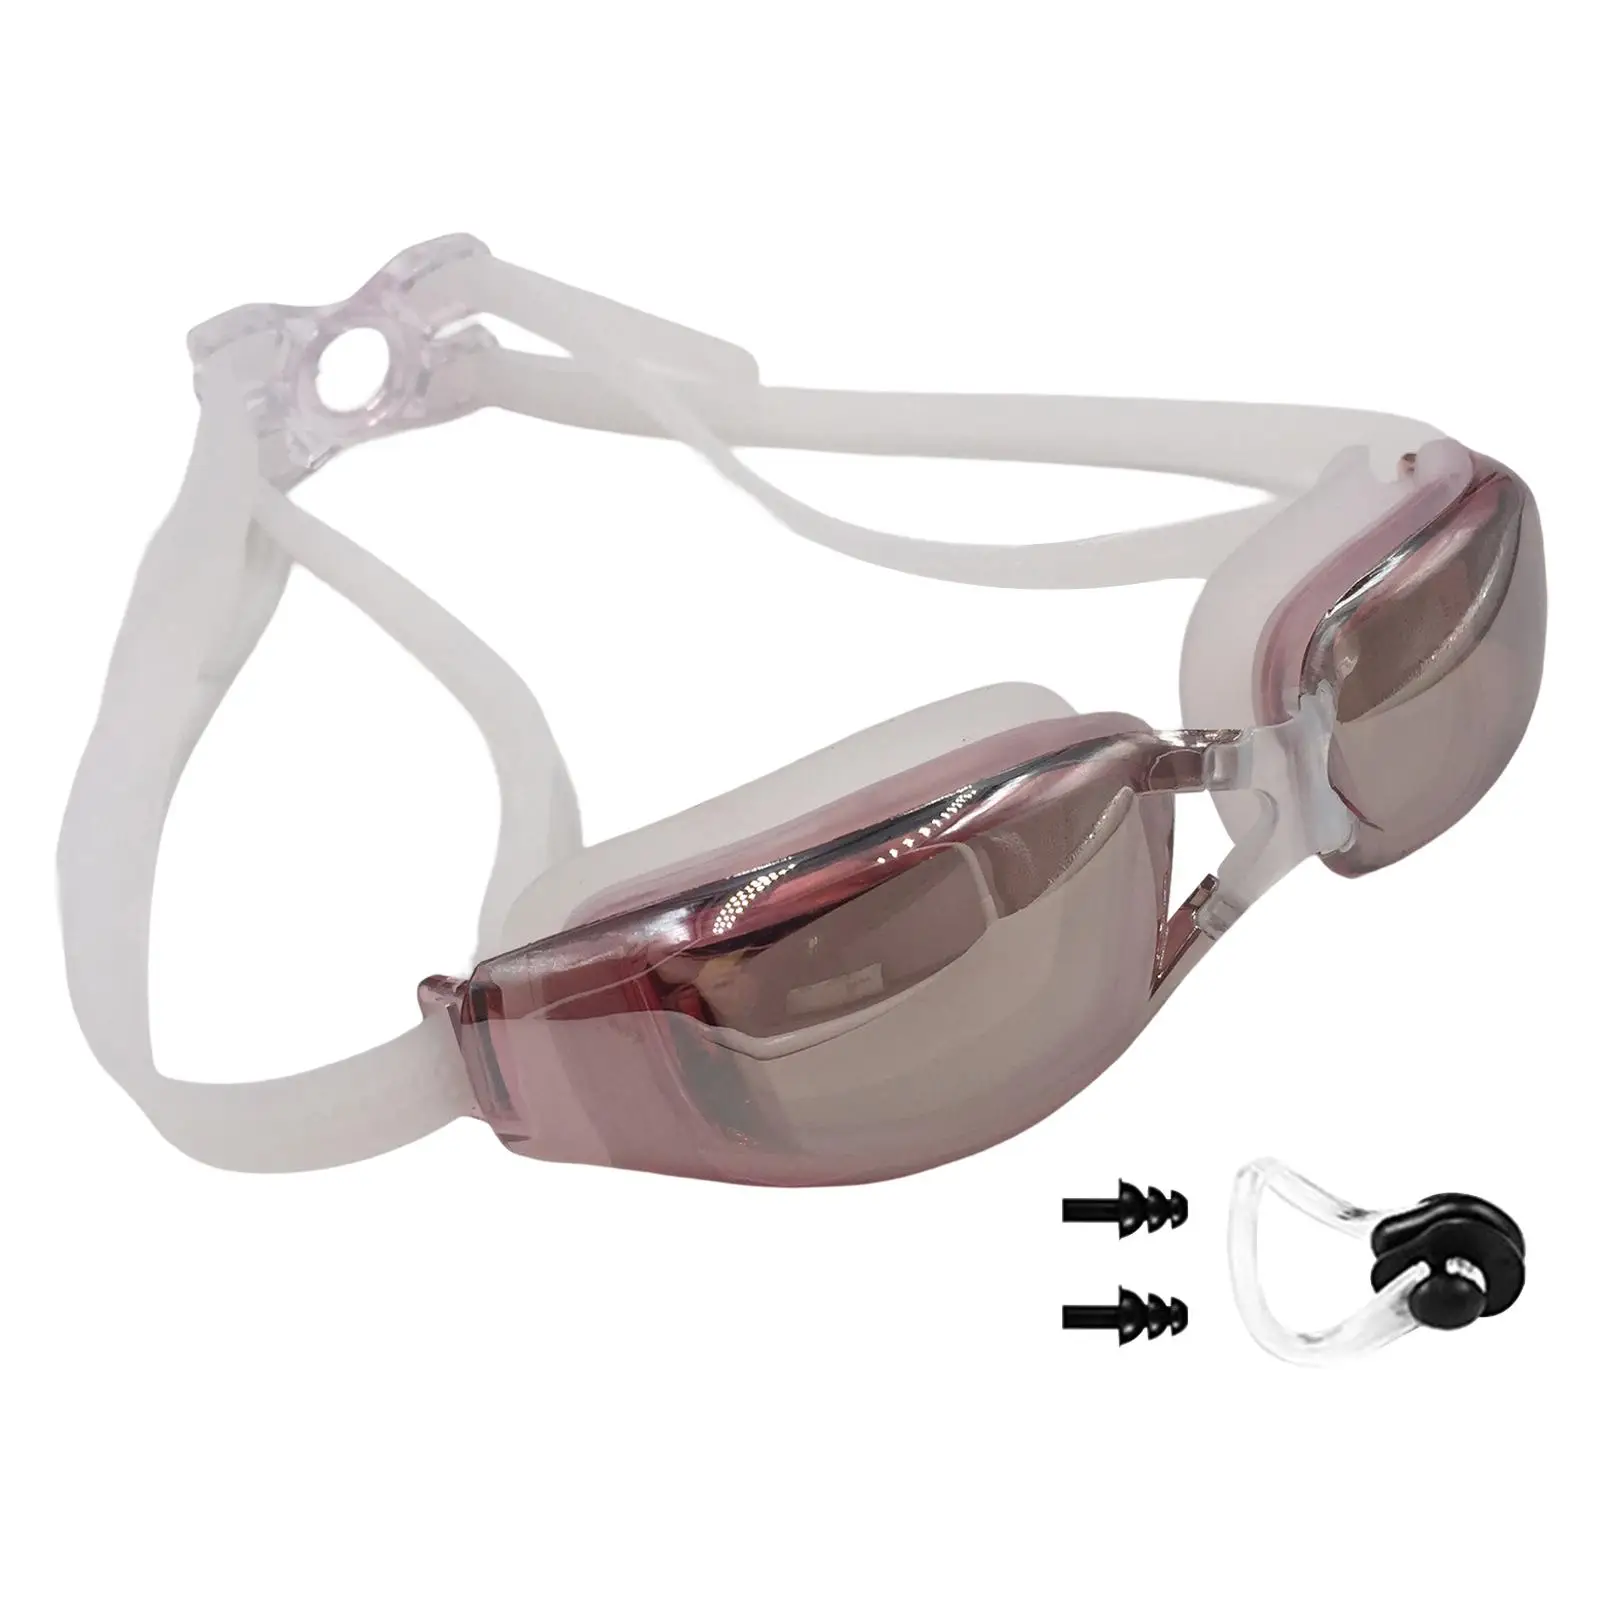 Swimming Goggles Anti Fog with Case Adult Women Men Eyewear Protection